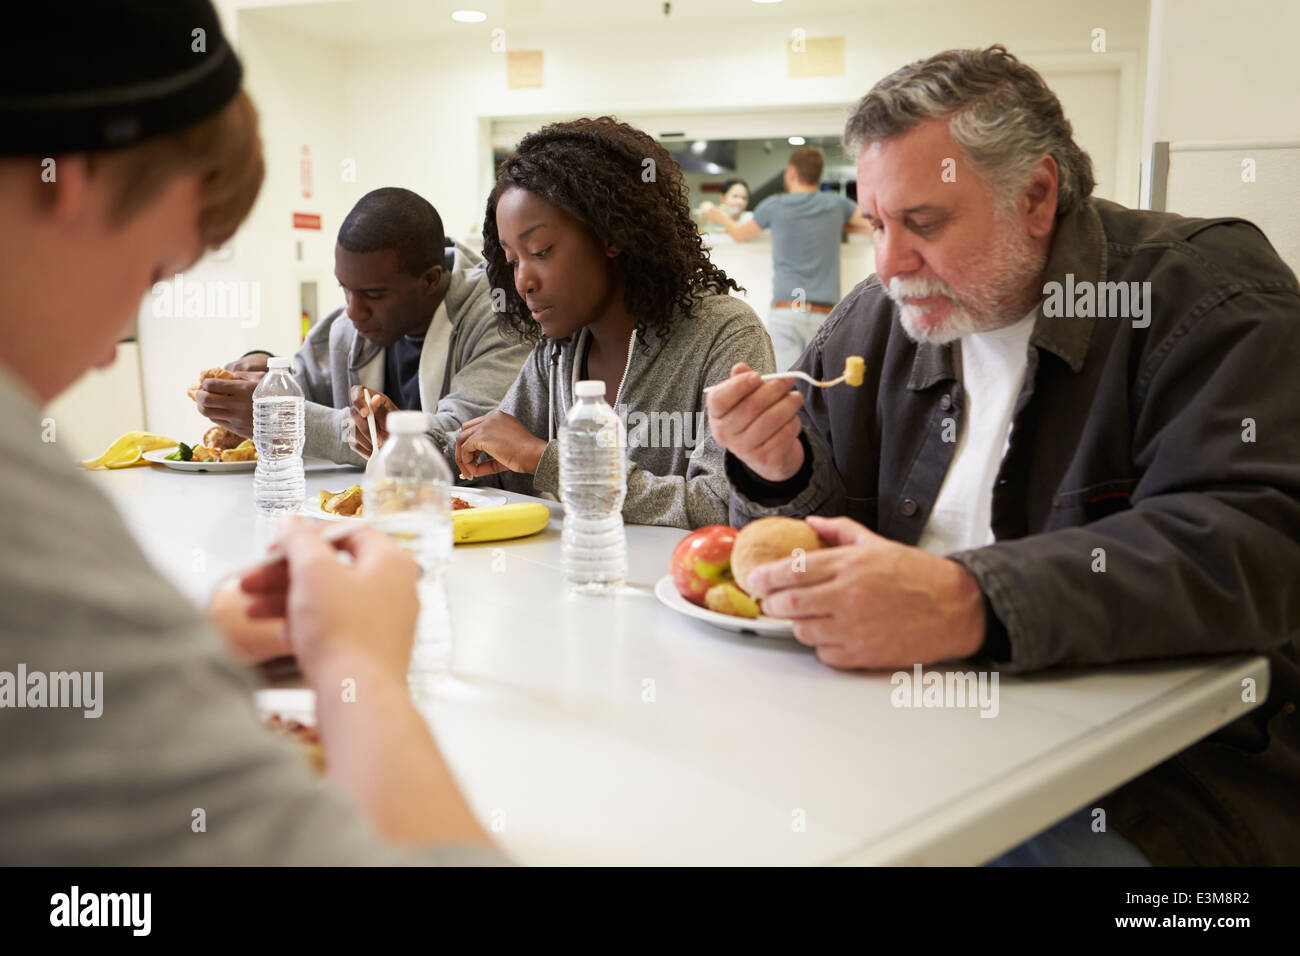 People Sitting At Table Eating Food In Homeless Shelter Stock Photo